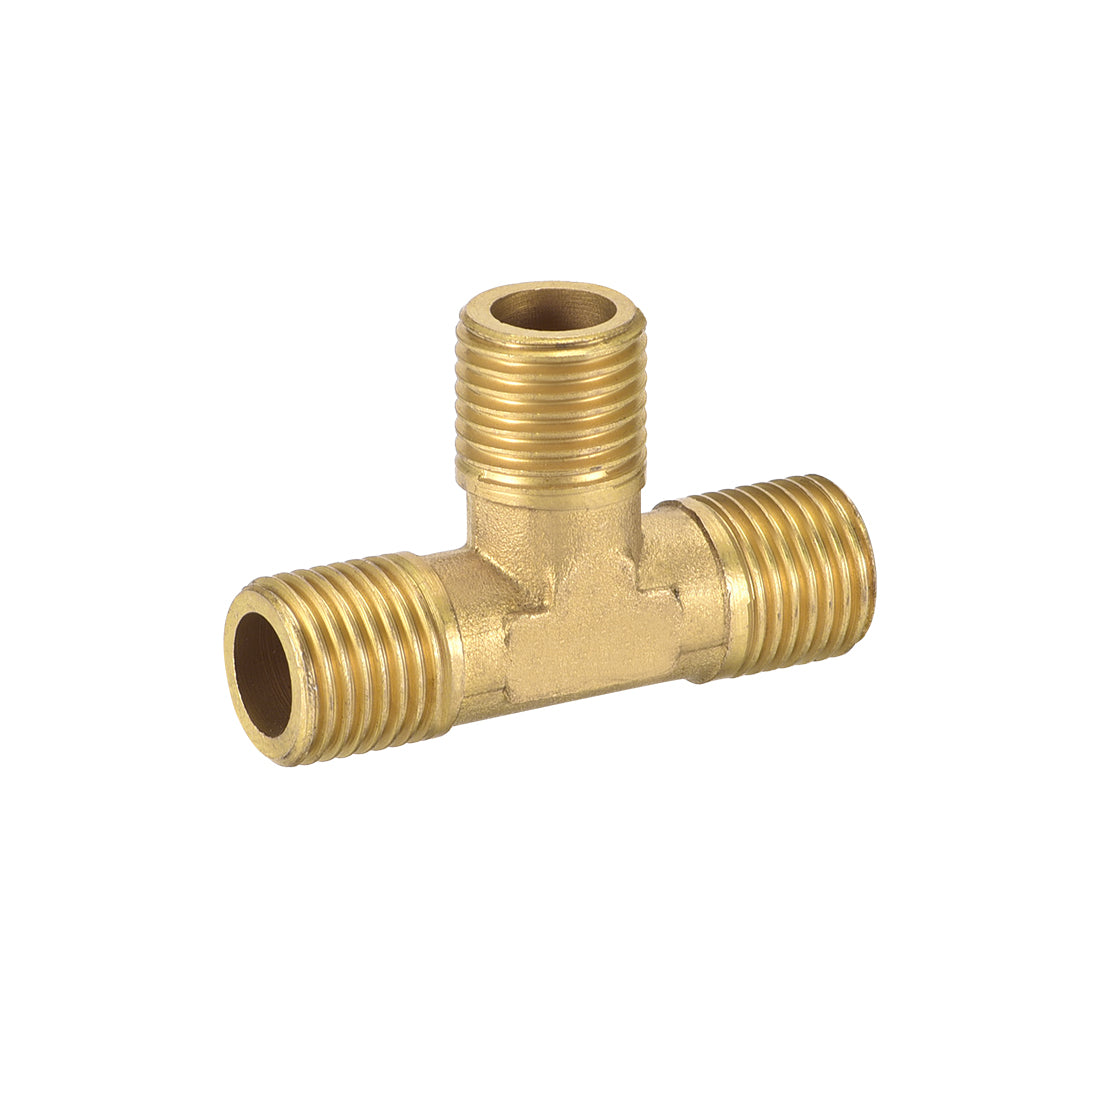 Uxcell Uxcell Brass Tee Pipe Fitting 1/4BSP Male Thread T Shaped Connector Coupler